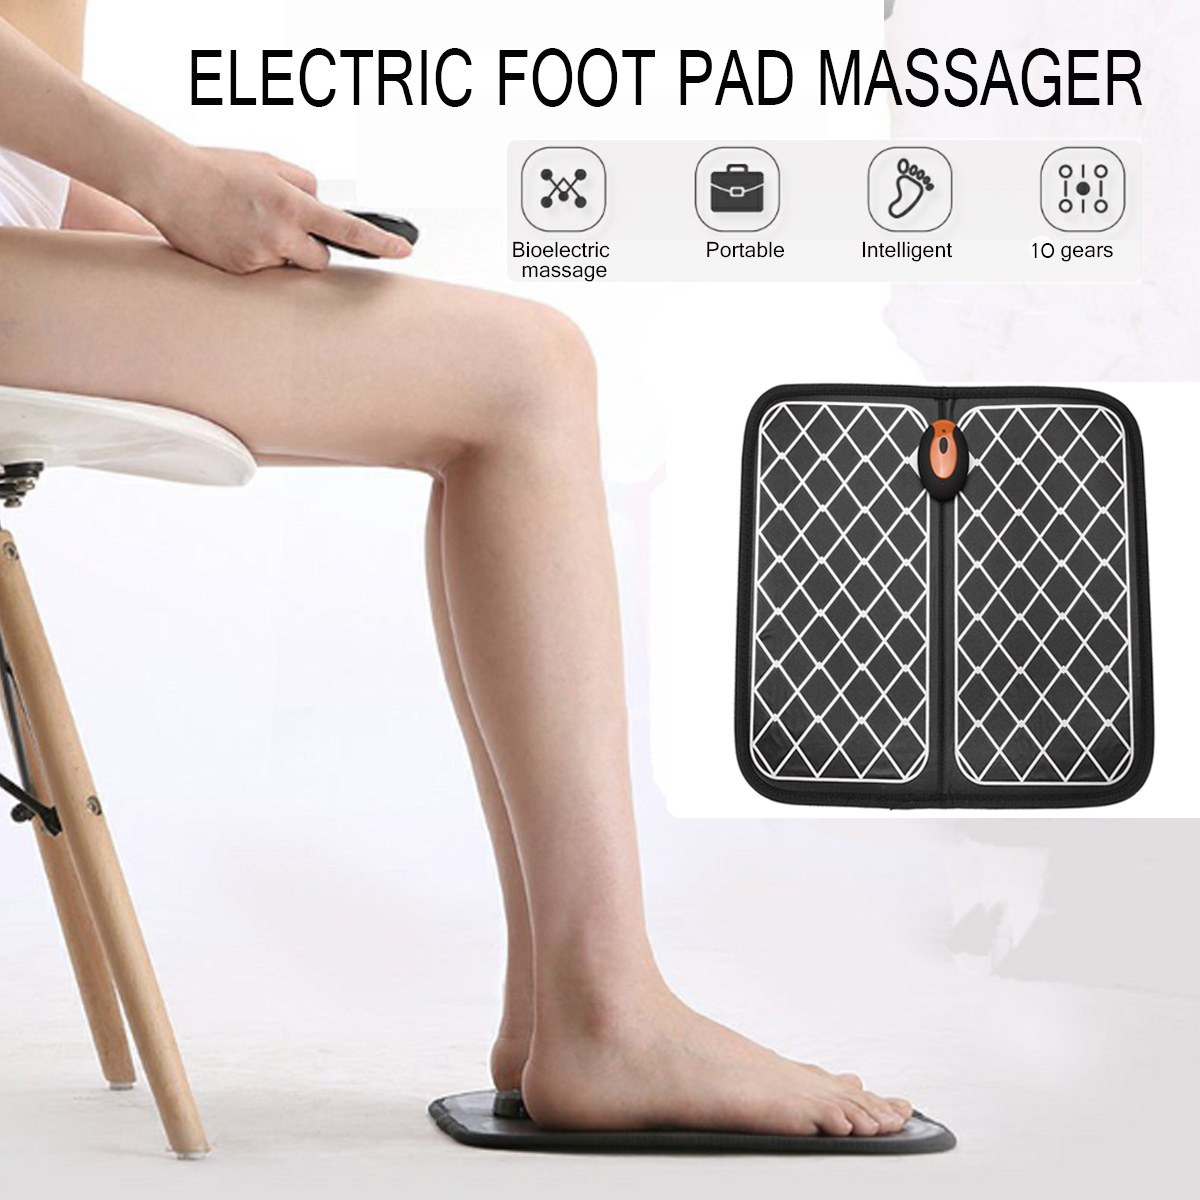 EMS-Portable-Shiatsu-Foot-Massager-Remote-controlled-Electric-Pad-Kneading-Circulation-Home-Electric-1508695-3